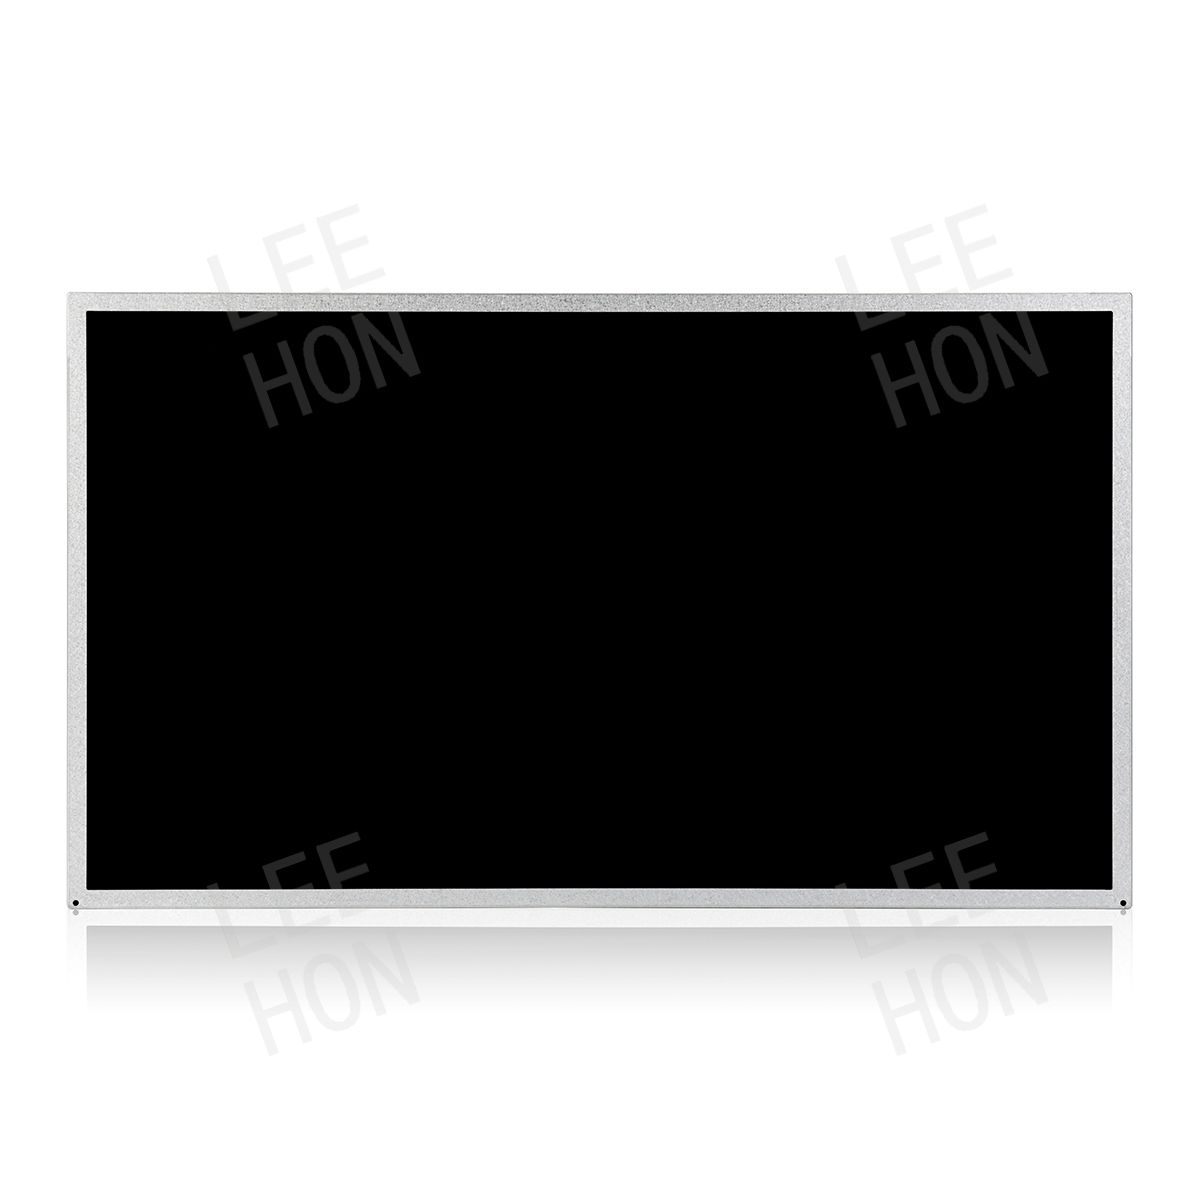 AUO 24 Inch 1920x1080 HD LCD Panel TFT IPS Display G240HW01 V1 300nits and 30pins LVDS